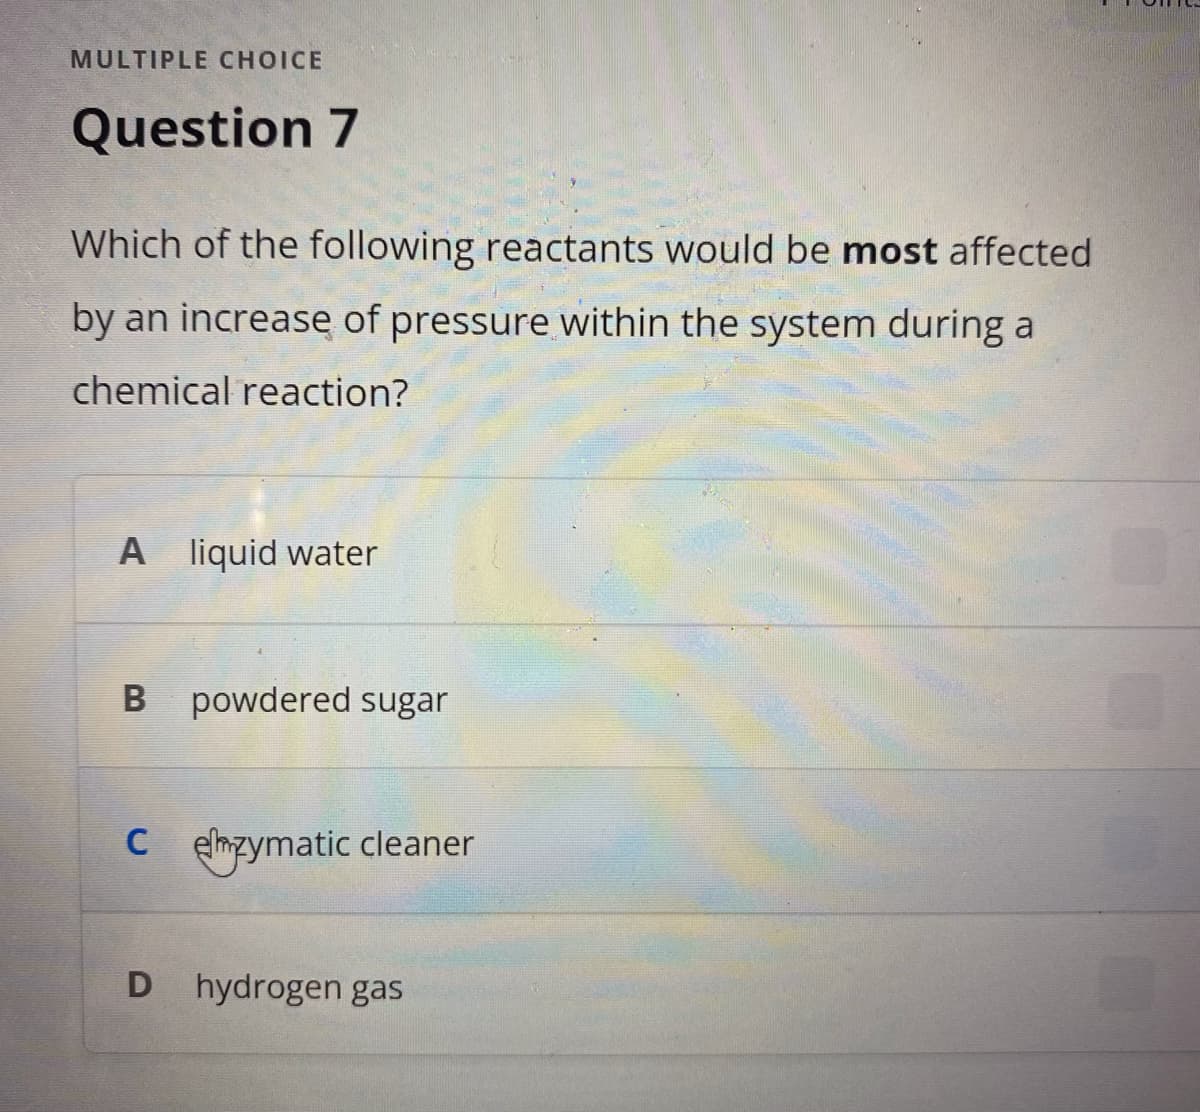 MULTIPLE CHOICE
Question 7
Which of the following reactants would be most affected
by an increase of pressure within the system during a
chemical reaction?
A liquid water
B powdered sugar
Czymatic cleaner
D hydrogen gas